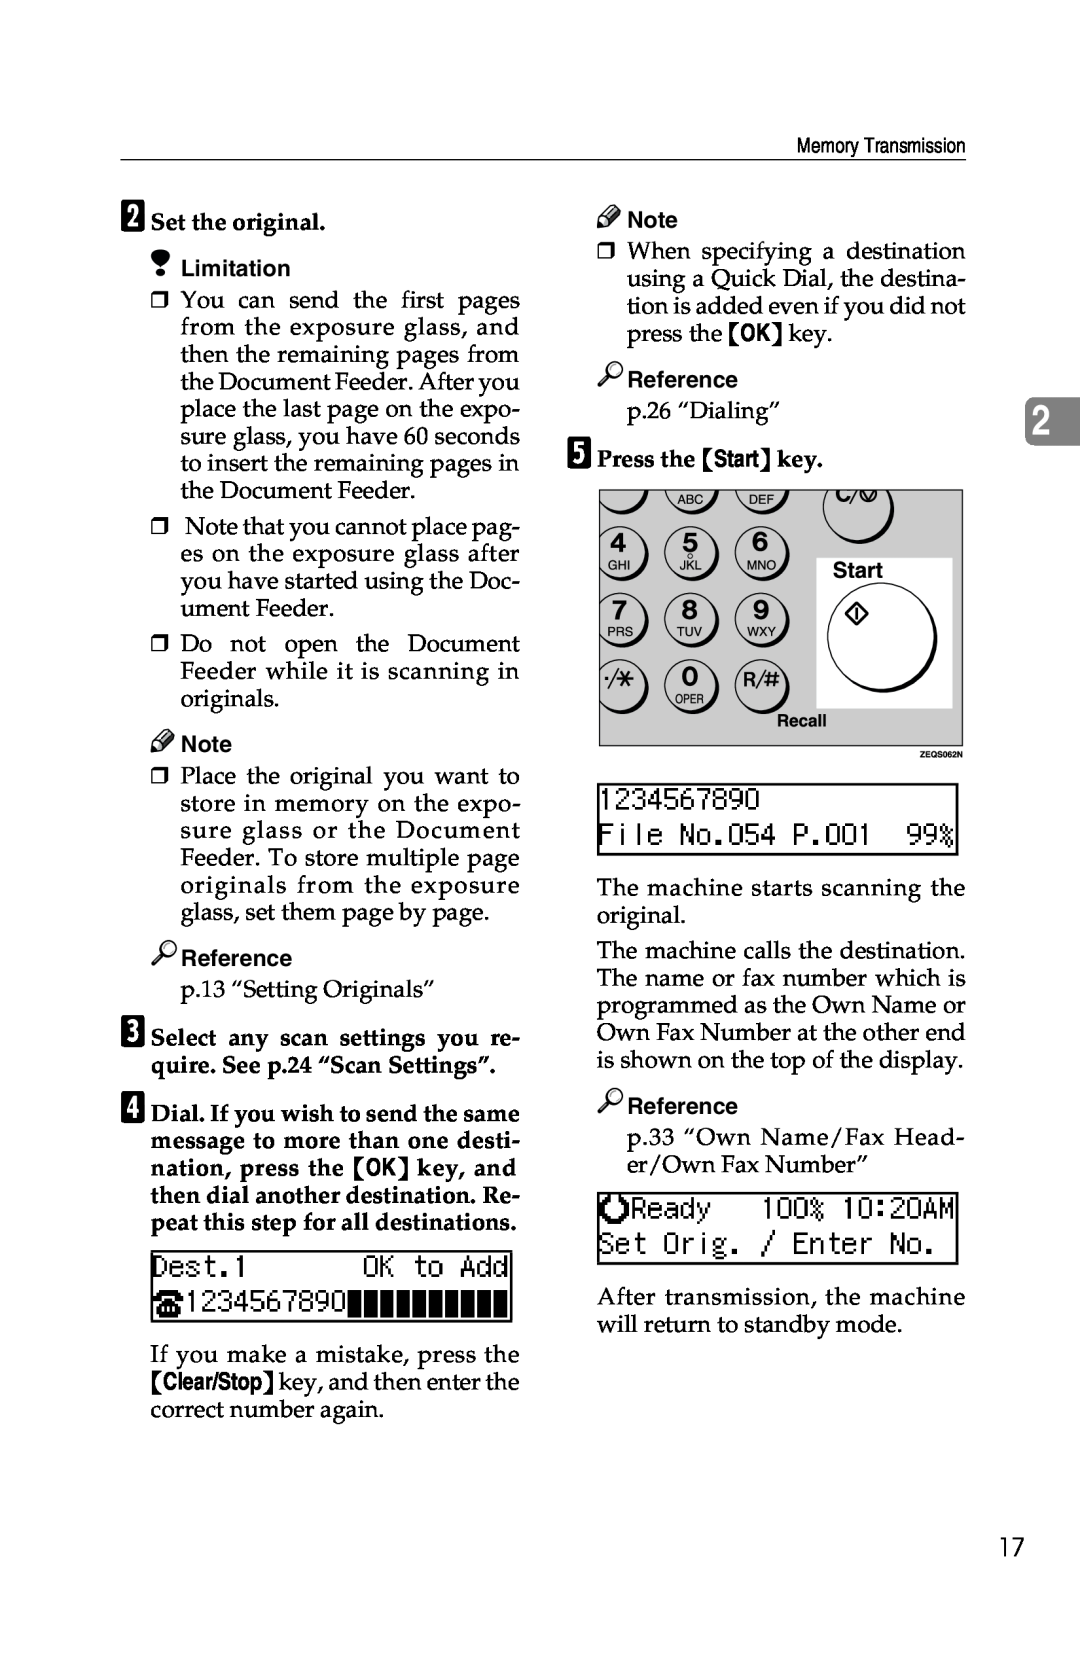 Savin G1619 B Set the original, C Select any scan settings you re- quire. See p.24 “Scan Settings”, E Press the Start key 